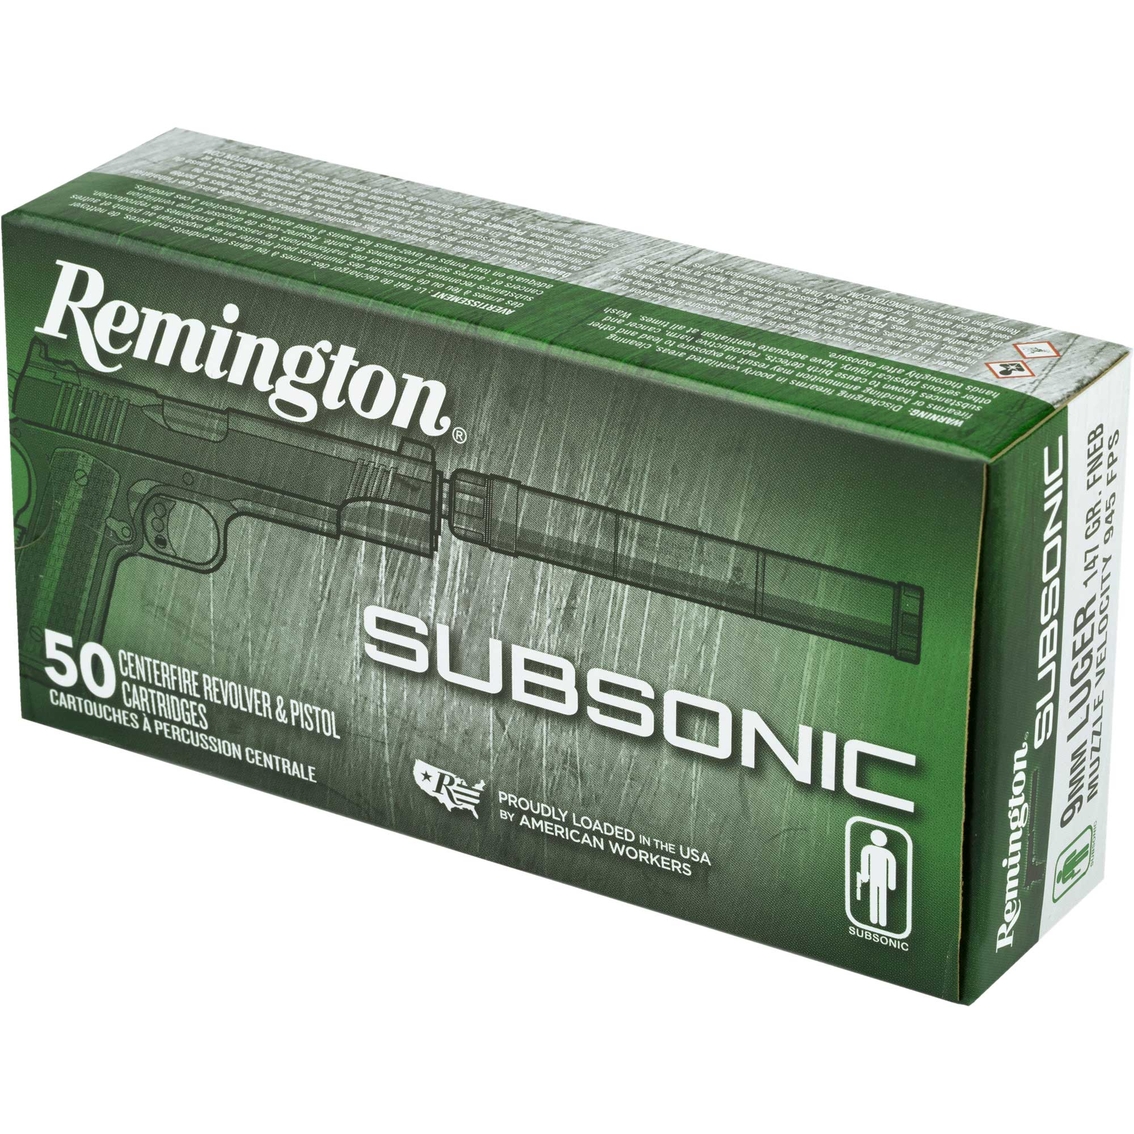 Remington Subsonic 9MM 147 Gr. Flat Nose Enclosed Bullet 50 Rounds - Image 2 of 3